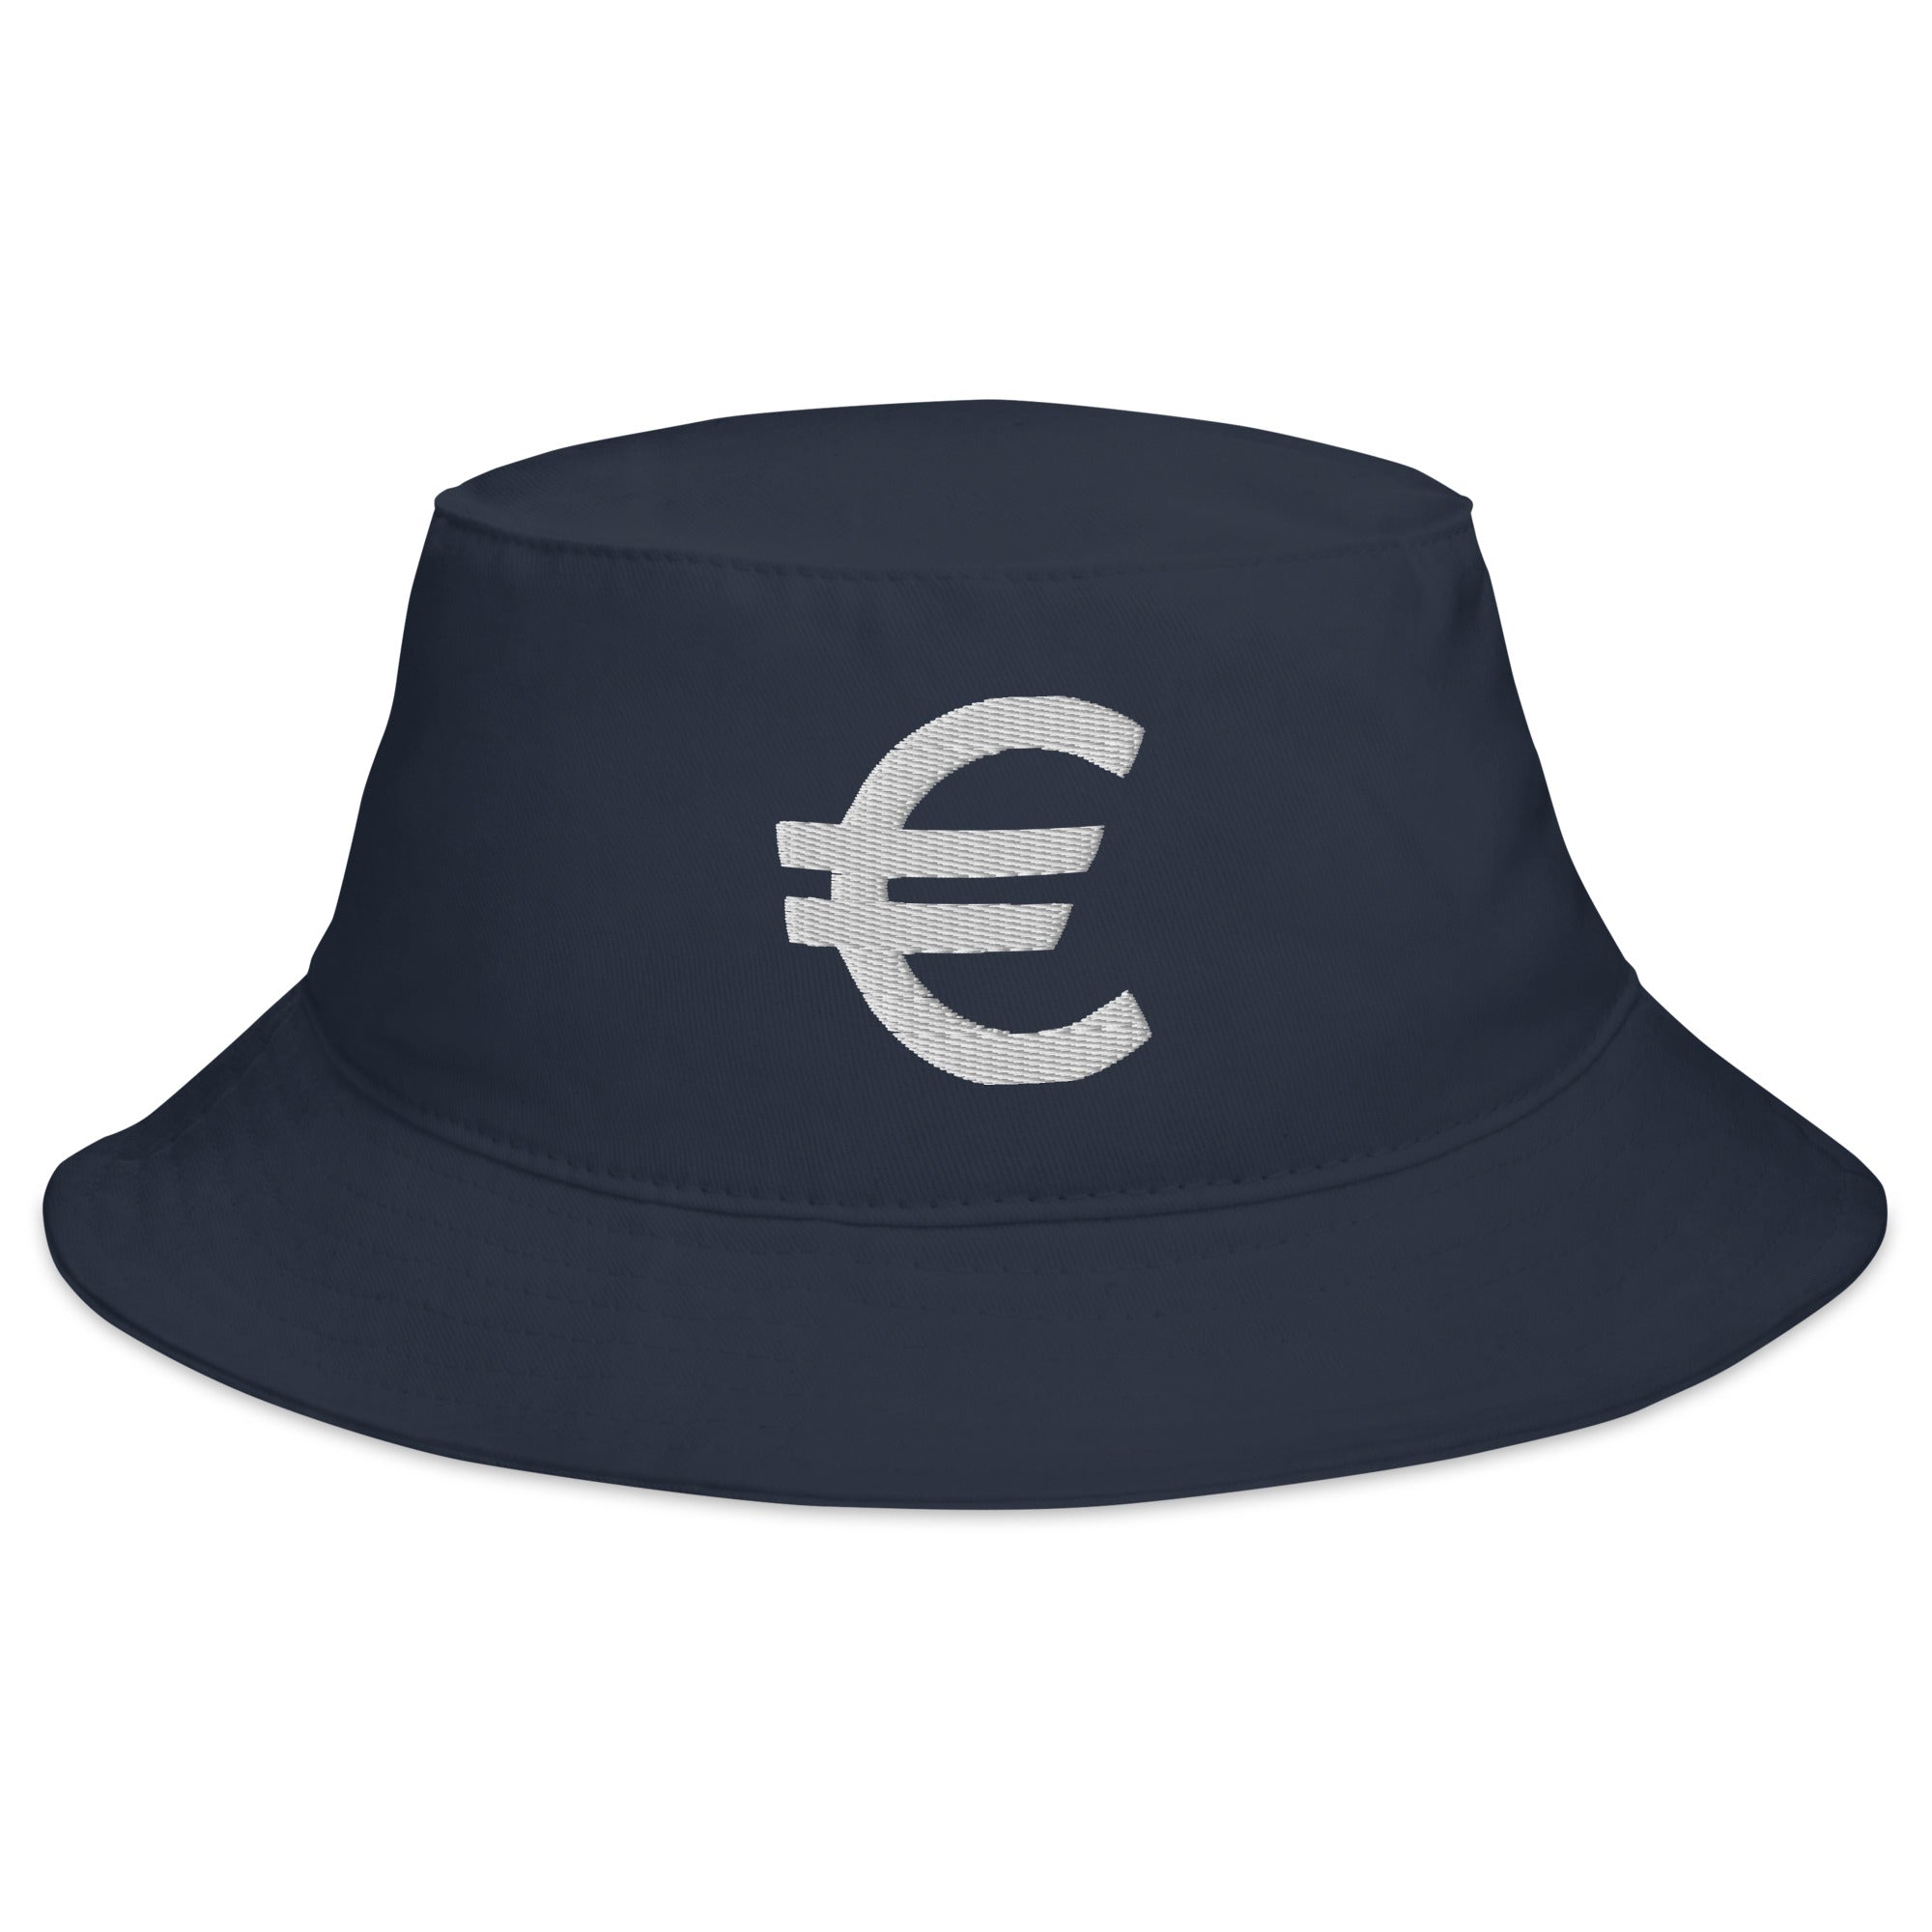 The Euro Currency Money Symbol of European Union Embroidered Bucket Hat